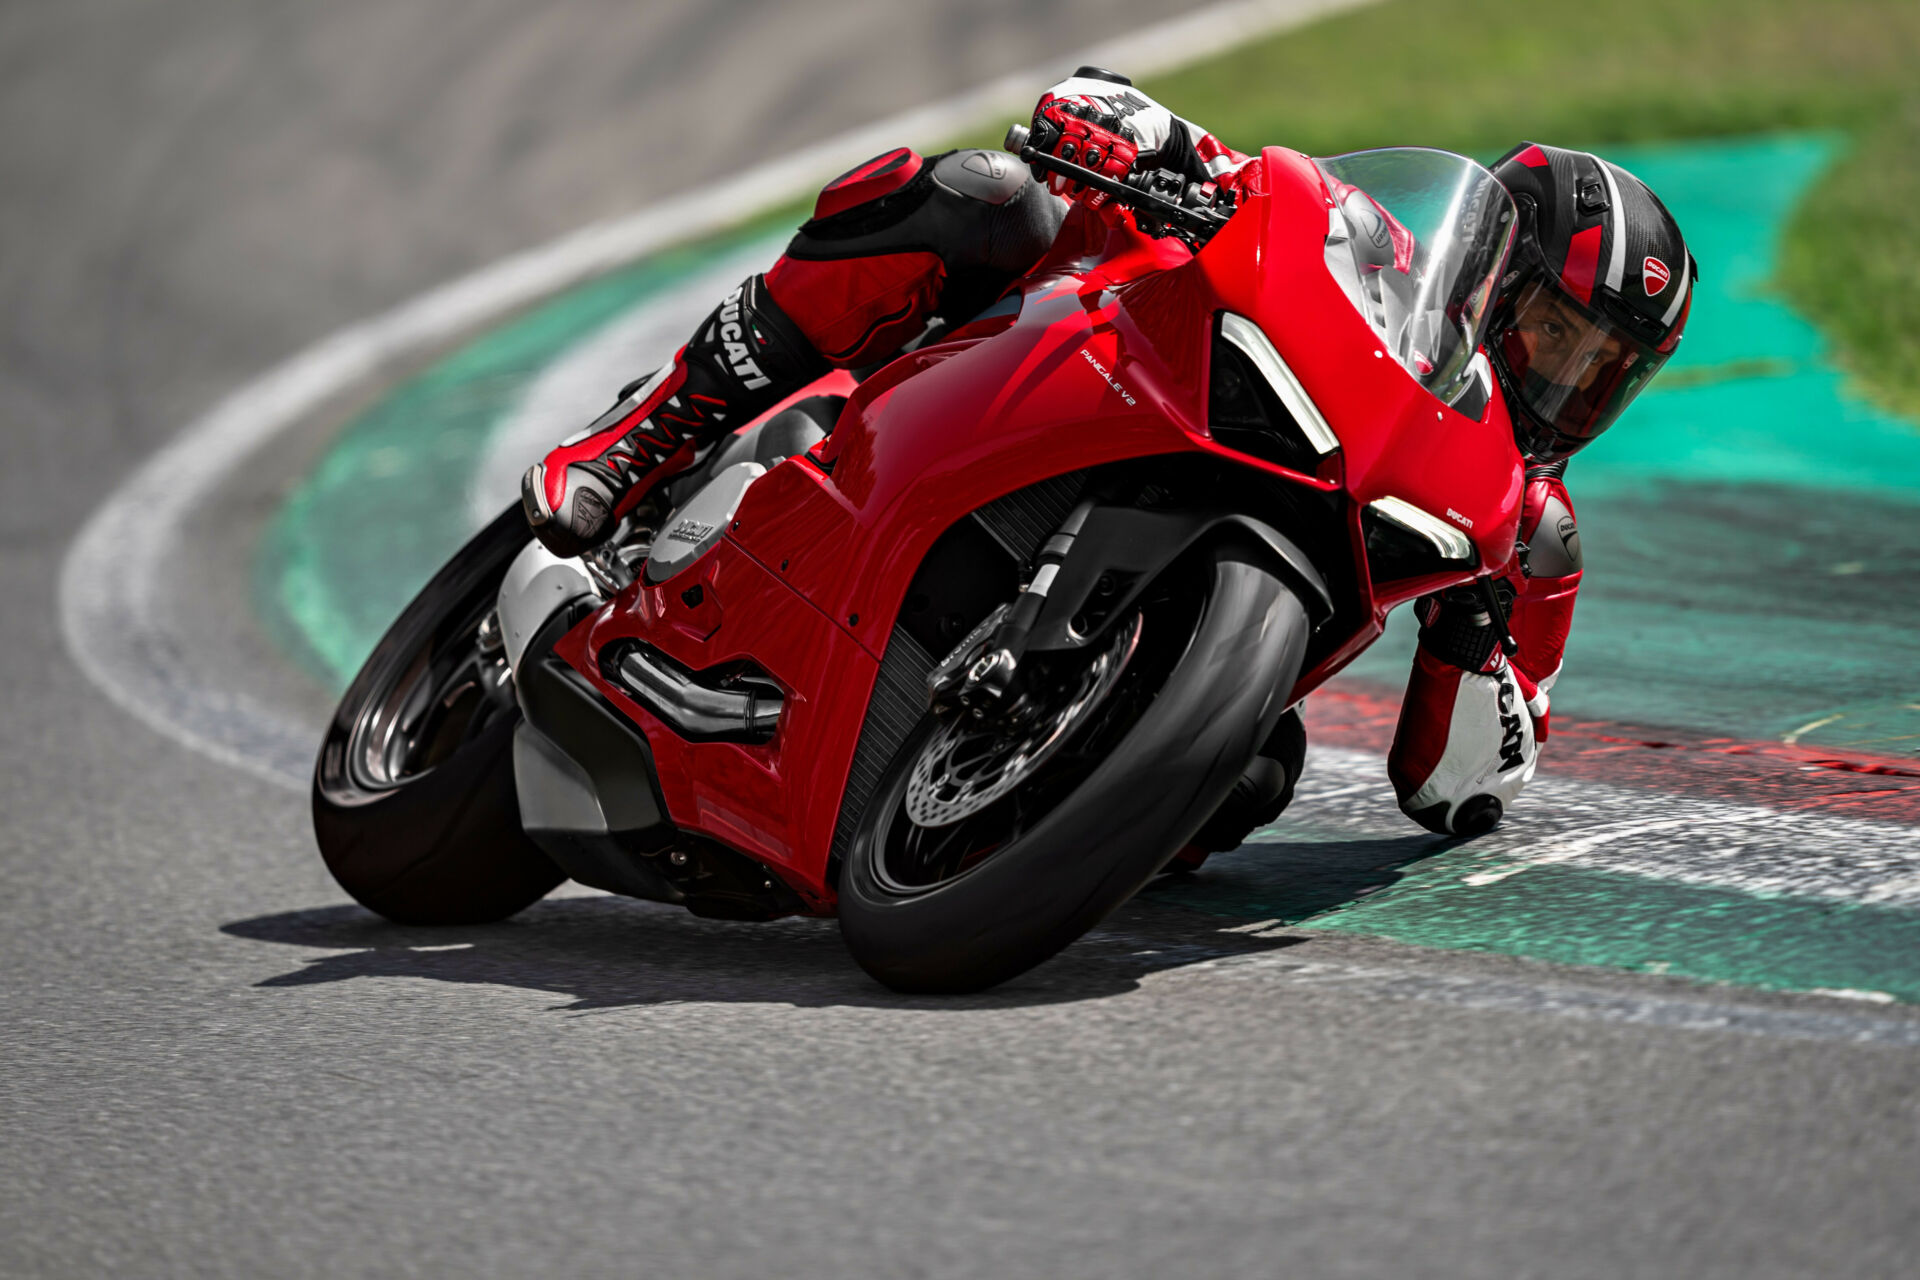 Canadian Superbike and Sport Bike racers on Ducati Panigale V4 and V2 motorcycles can earn contingency from Ducati North America in 2023. Photo courtesy Ducati North America.